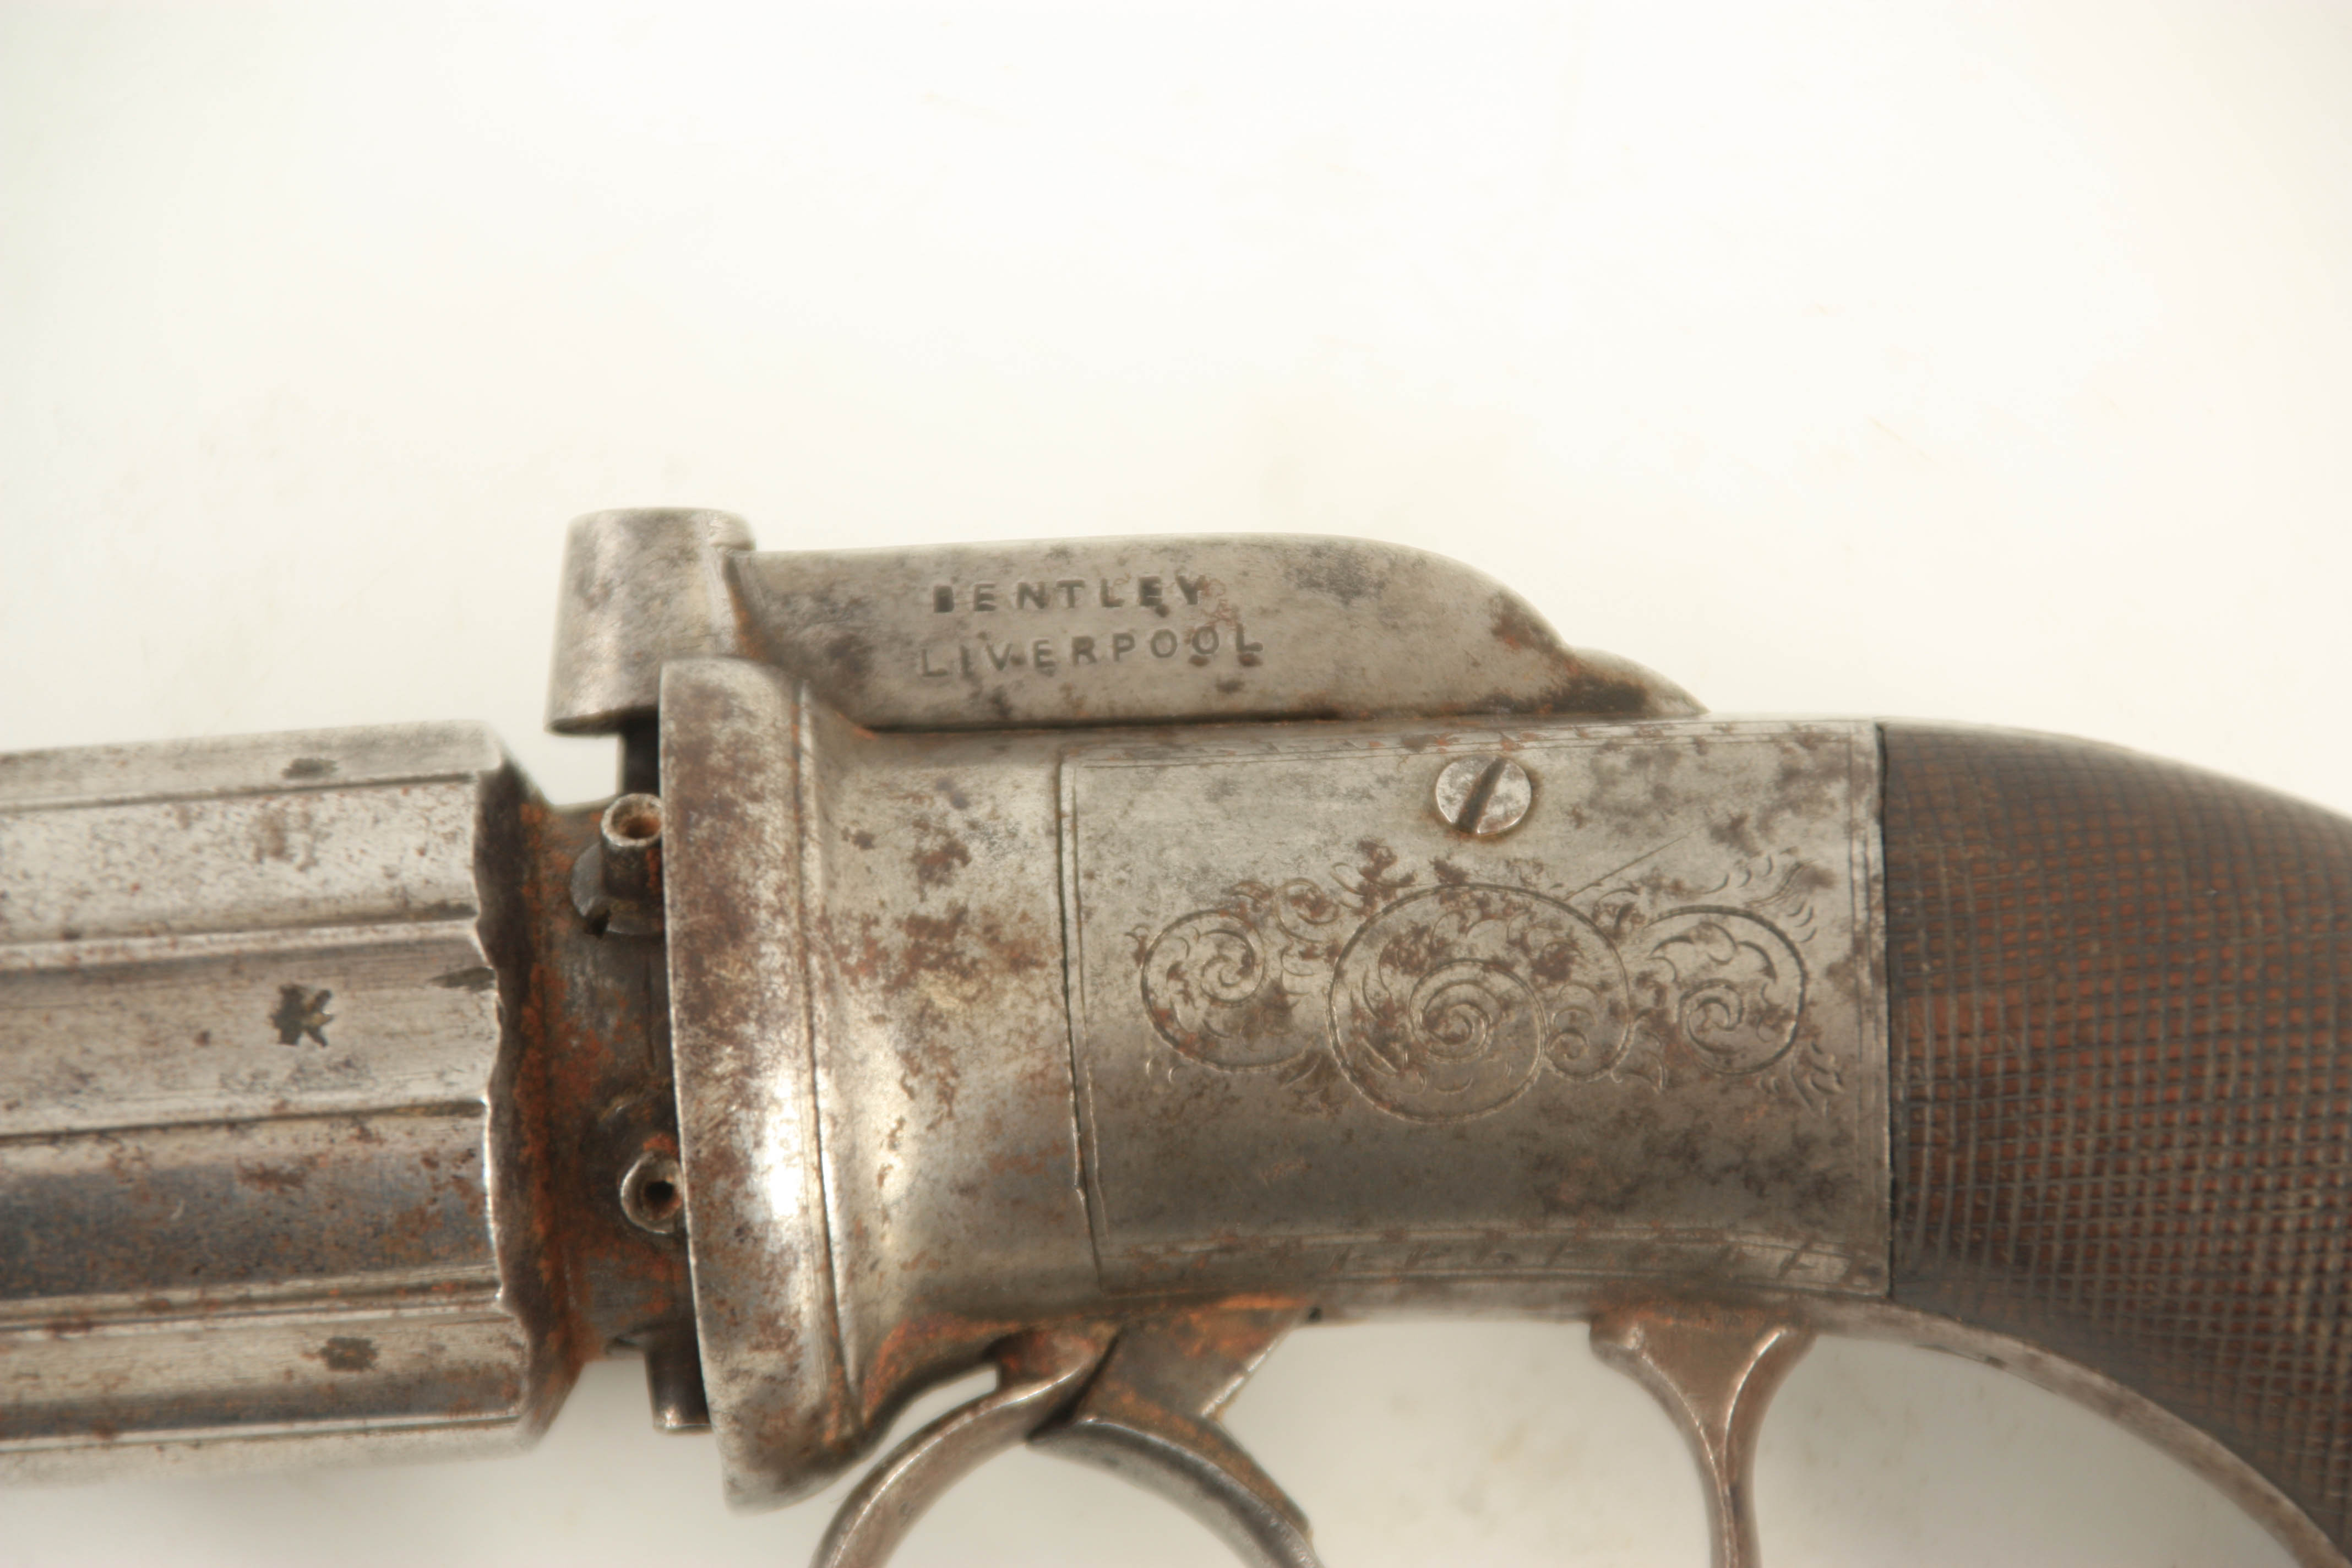 BENTLEY, LIVERPOOL A MID 19TH CENTURY SIX SHOT PEPPERBOX REVOLVER with signed self cocking bar - Image 2 of 7